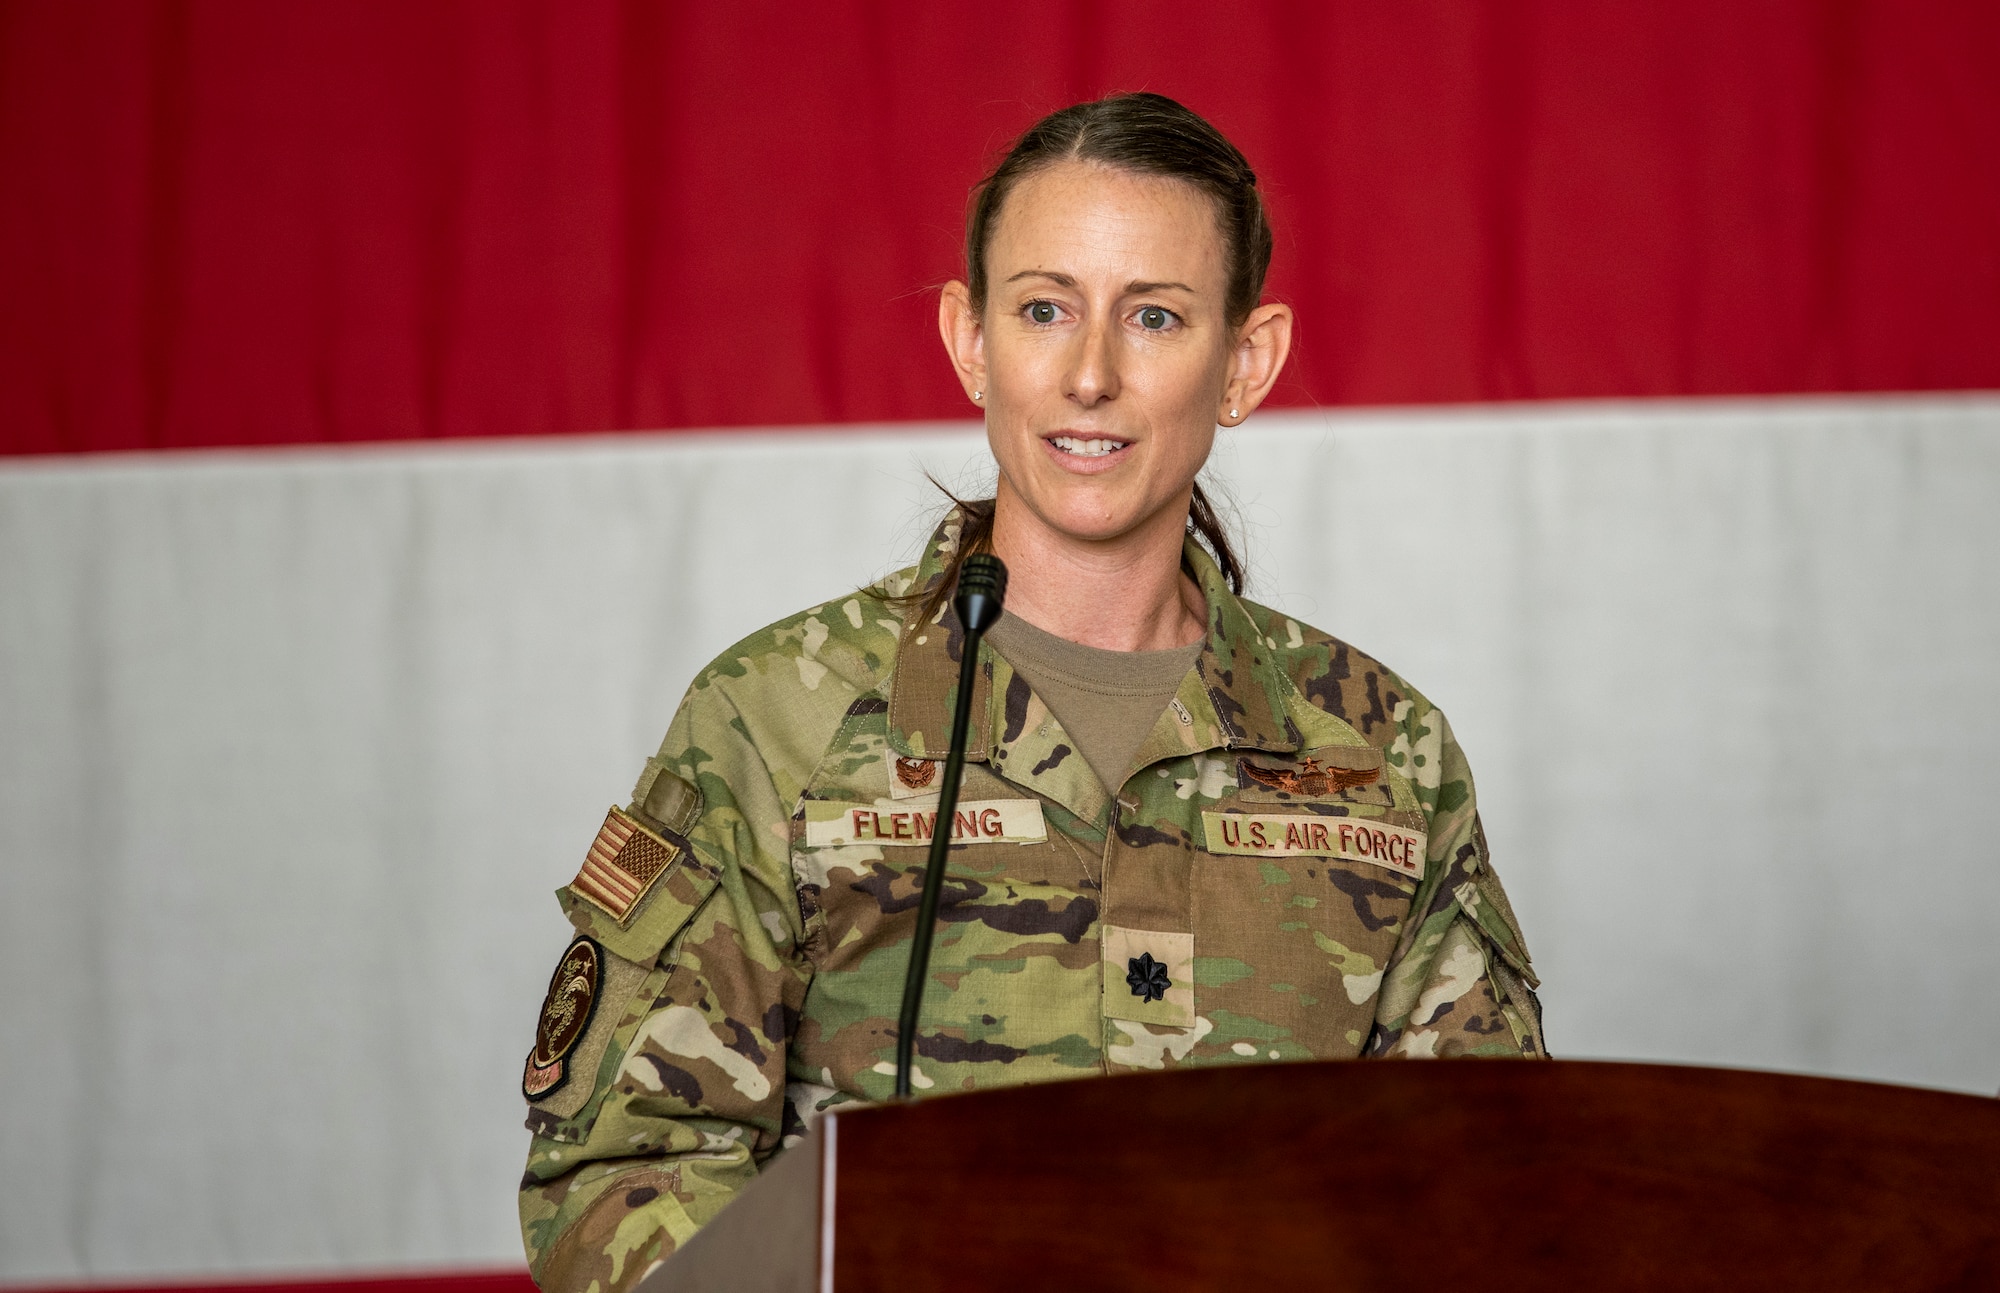 Lt. Col. Chandra Fleming, 51st Operations Support Squadron newly-appointed commander, addresses the audience after taking command of the OSS at Osan Air Base, Republic of Korea, June 7, 2022.